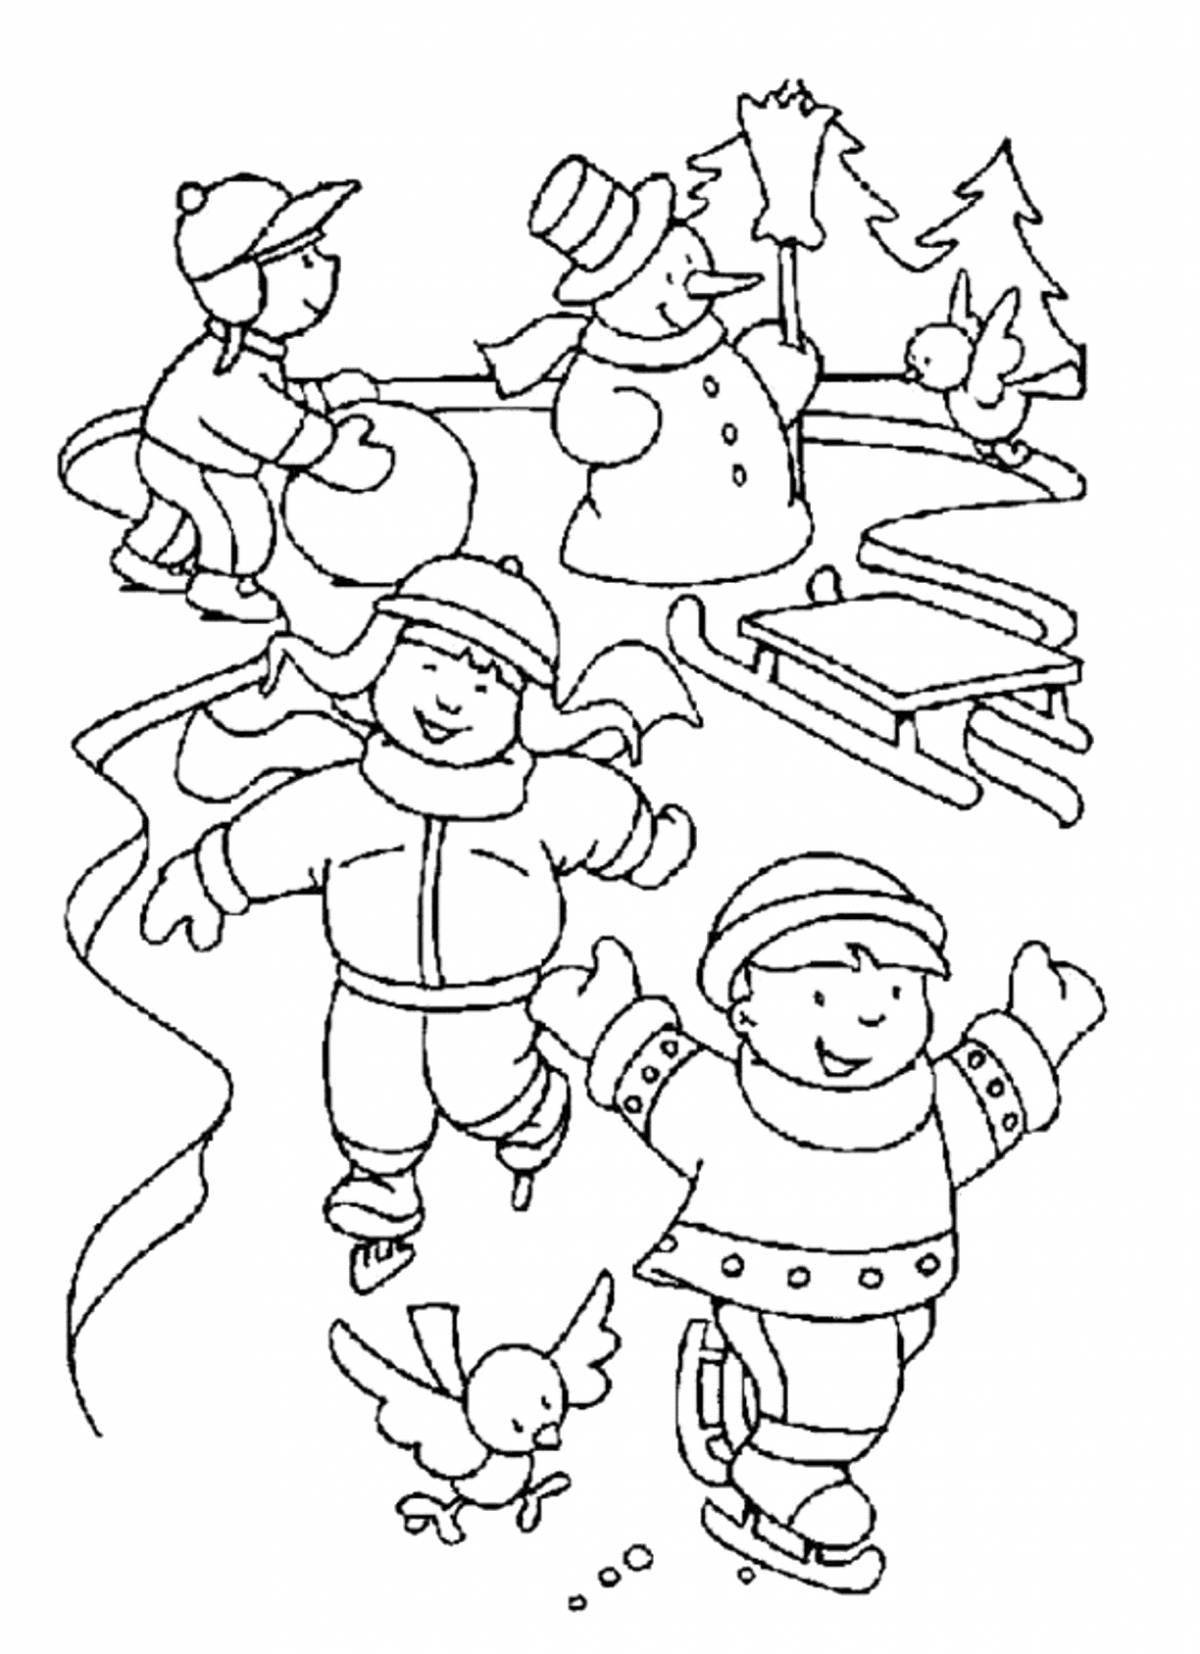 Fairy winter games coloring book